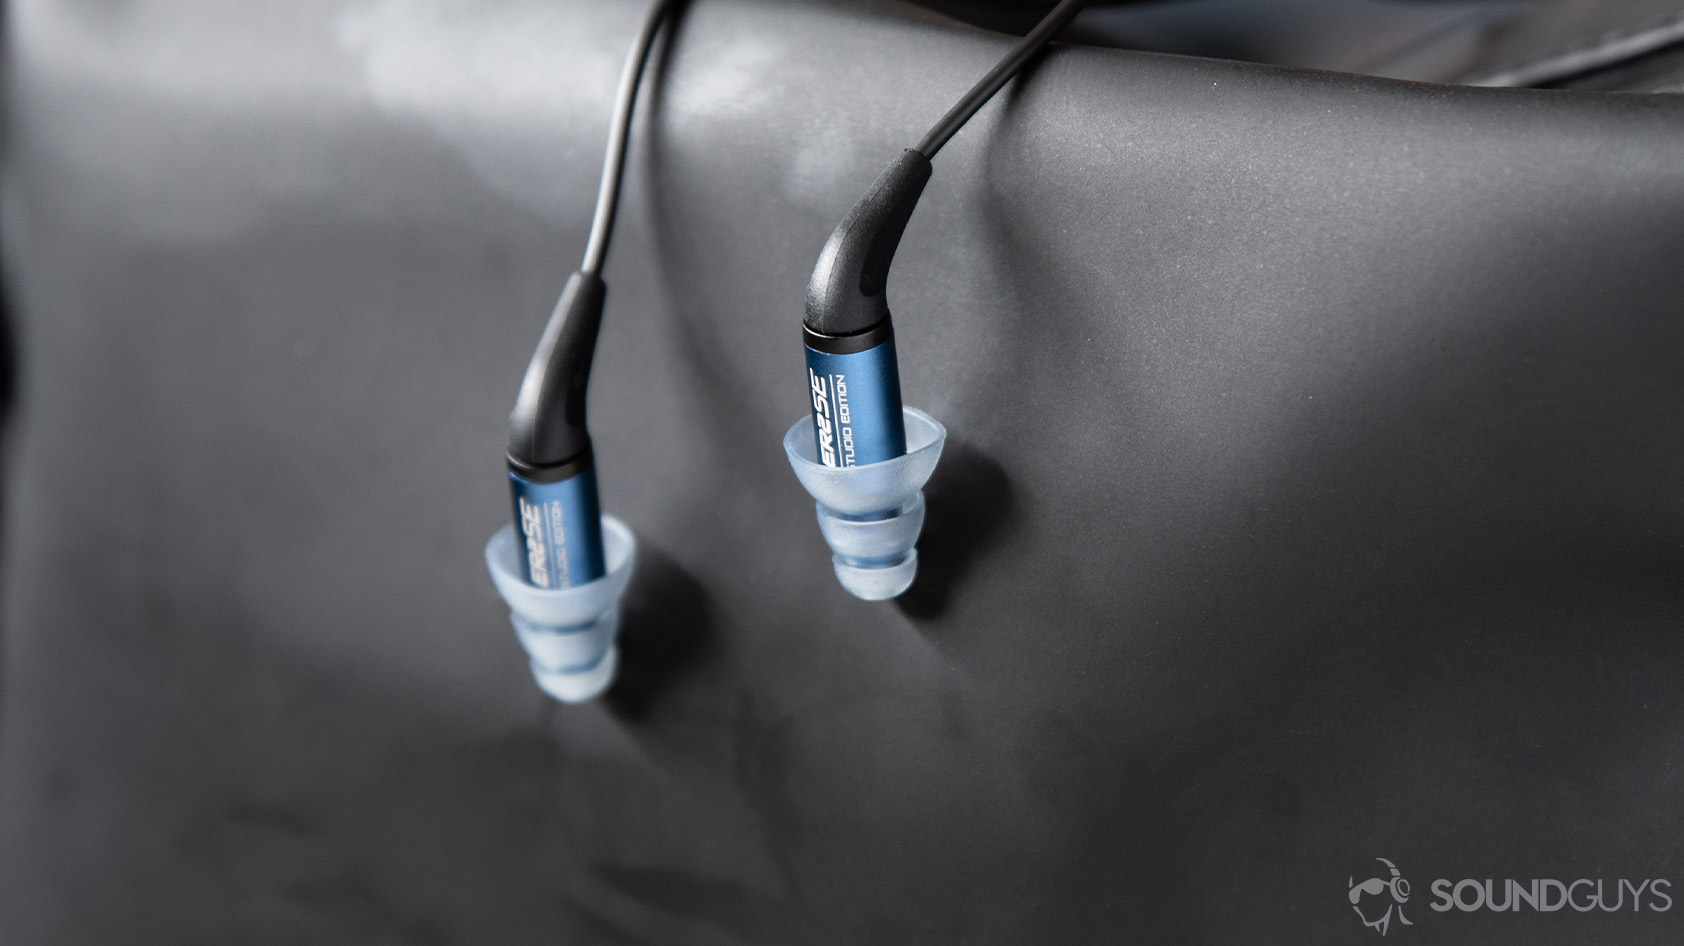 A picture of the Etymotic ER2SE wired earbud housings in front of a matte-black backdrop.